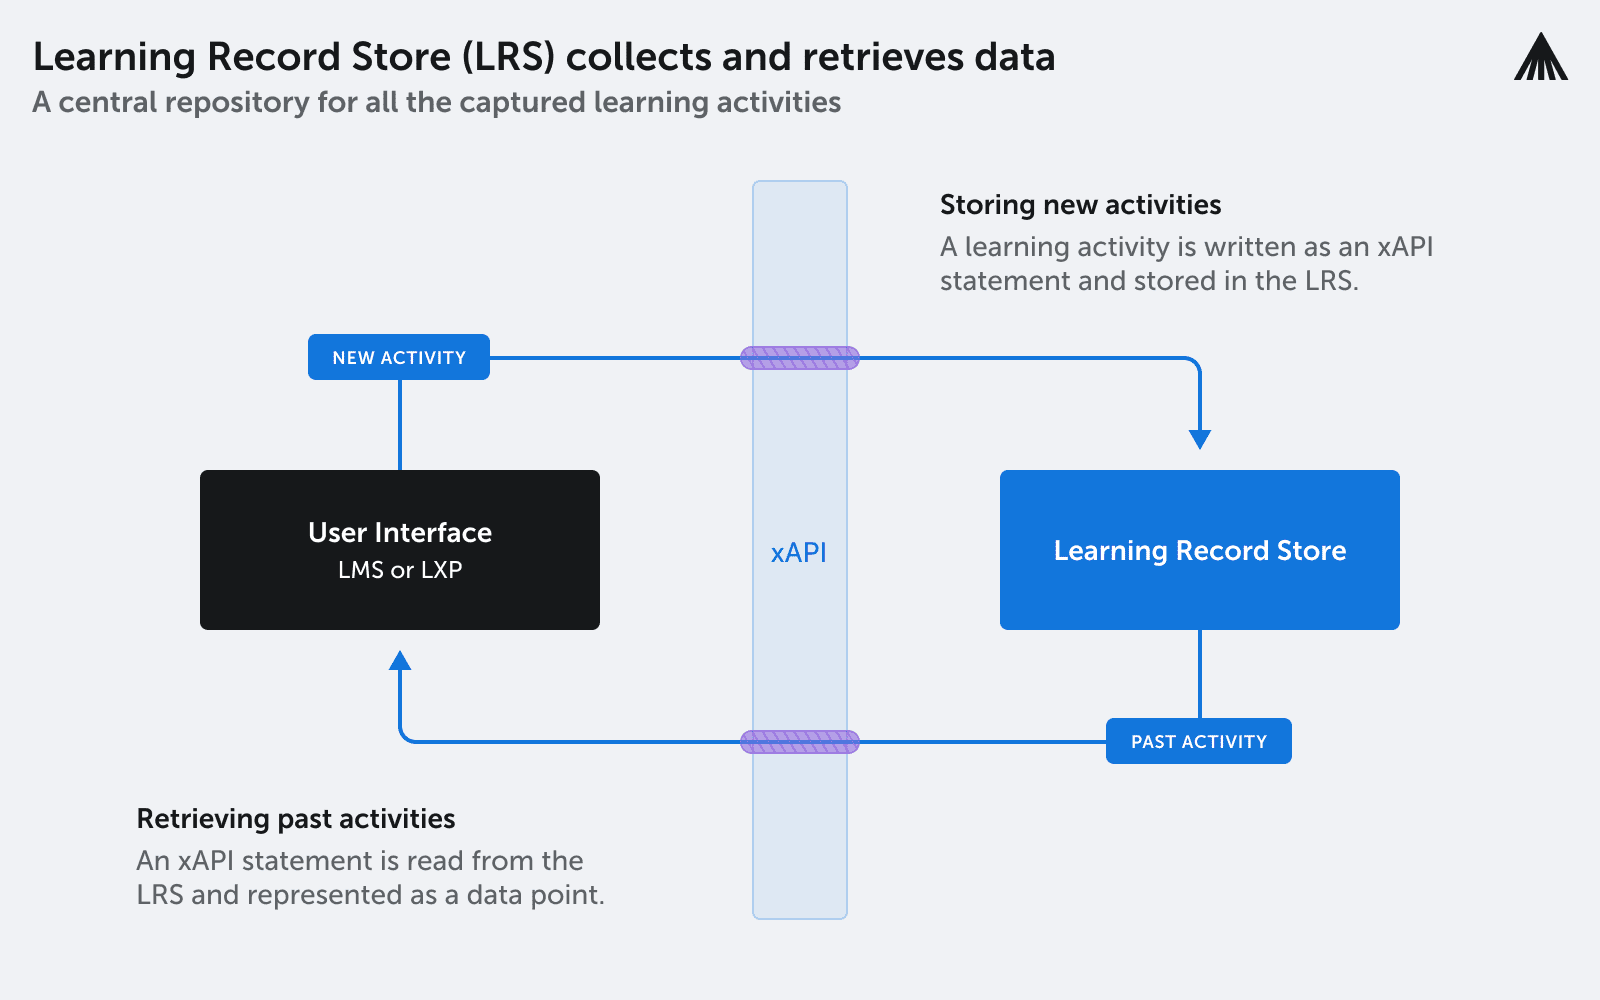 The image shows what LRS is and how it works